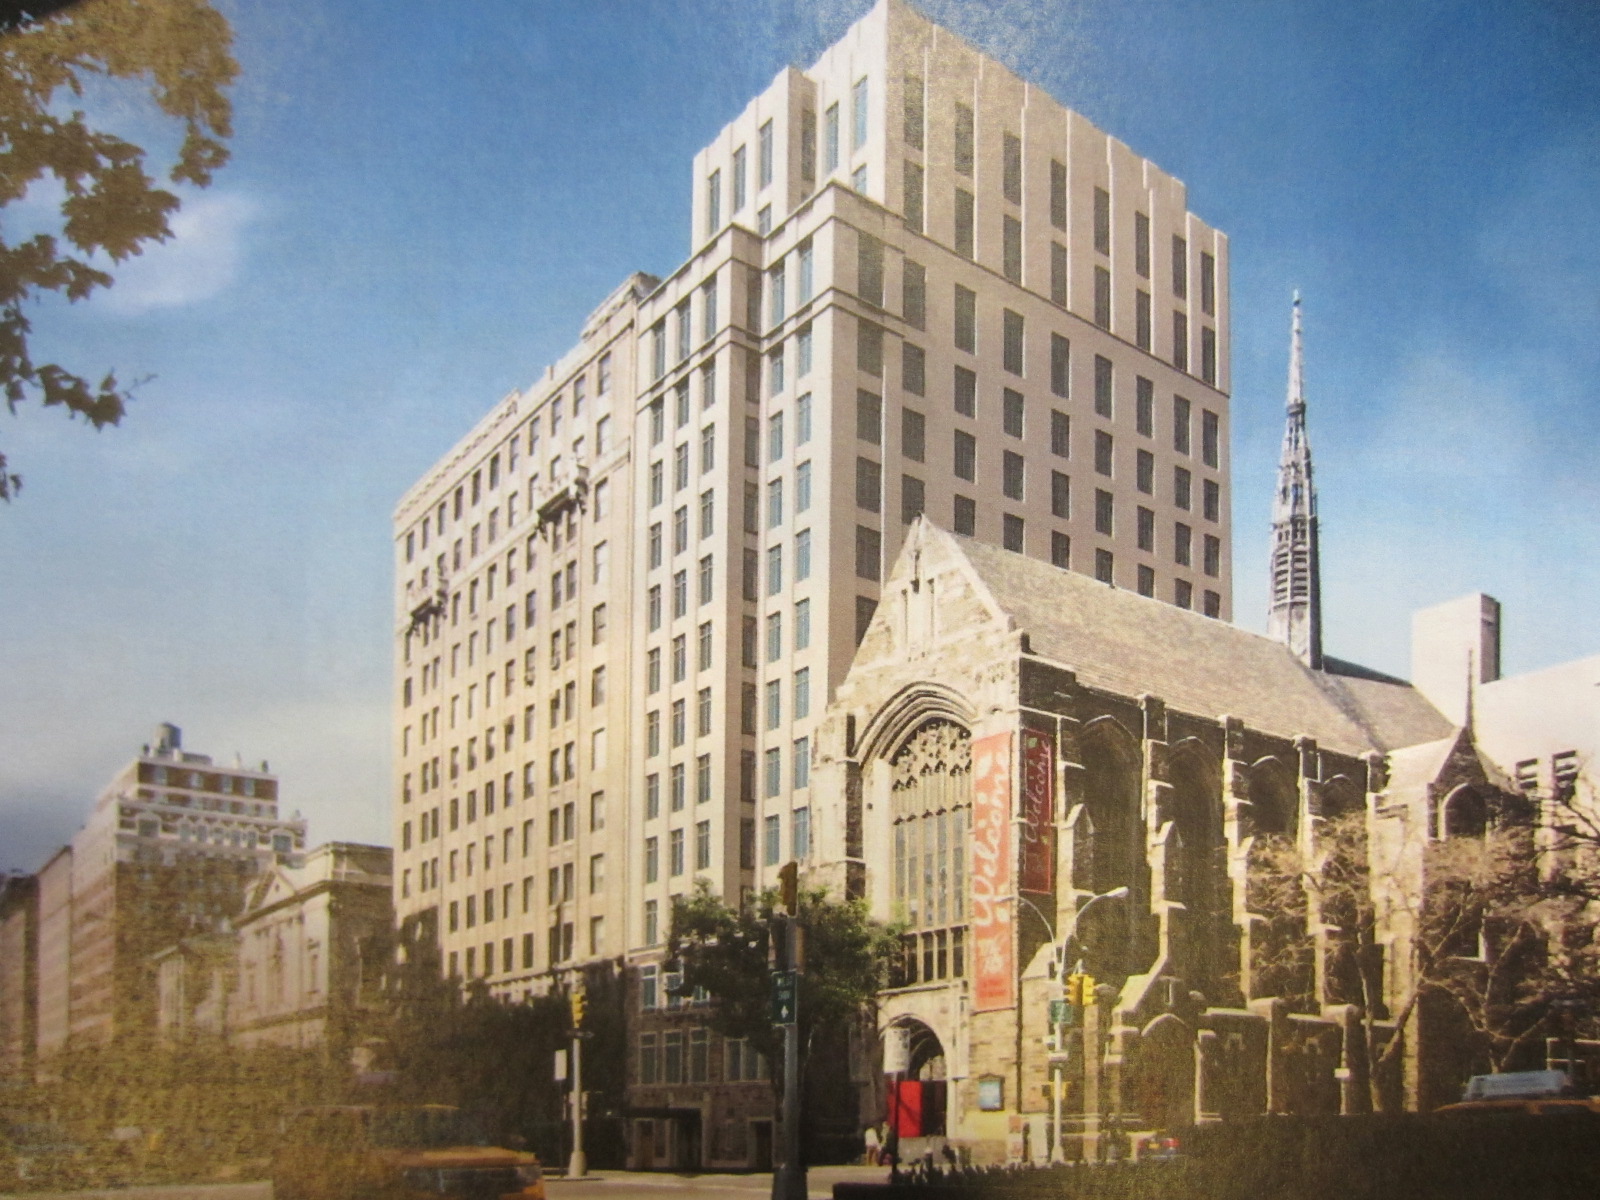 Rendering of new tower adjacent to Park Avenue Christian Church. Image credit: CityLand